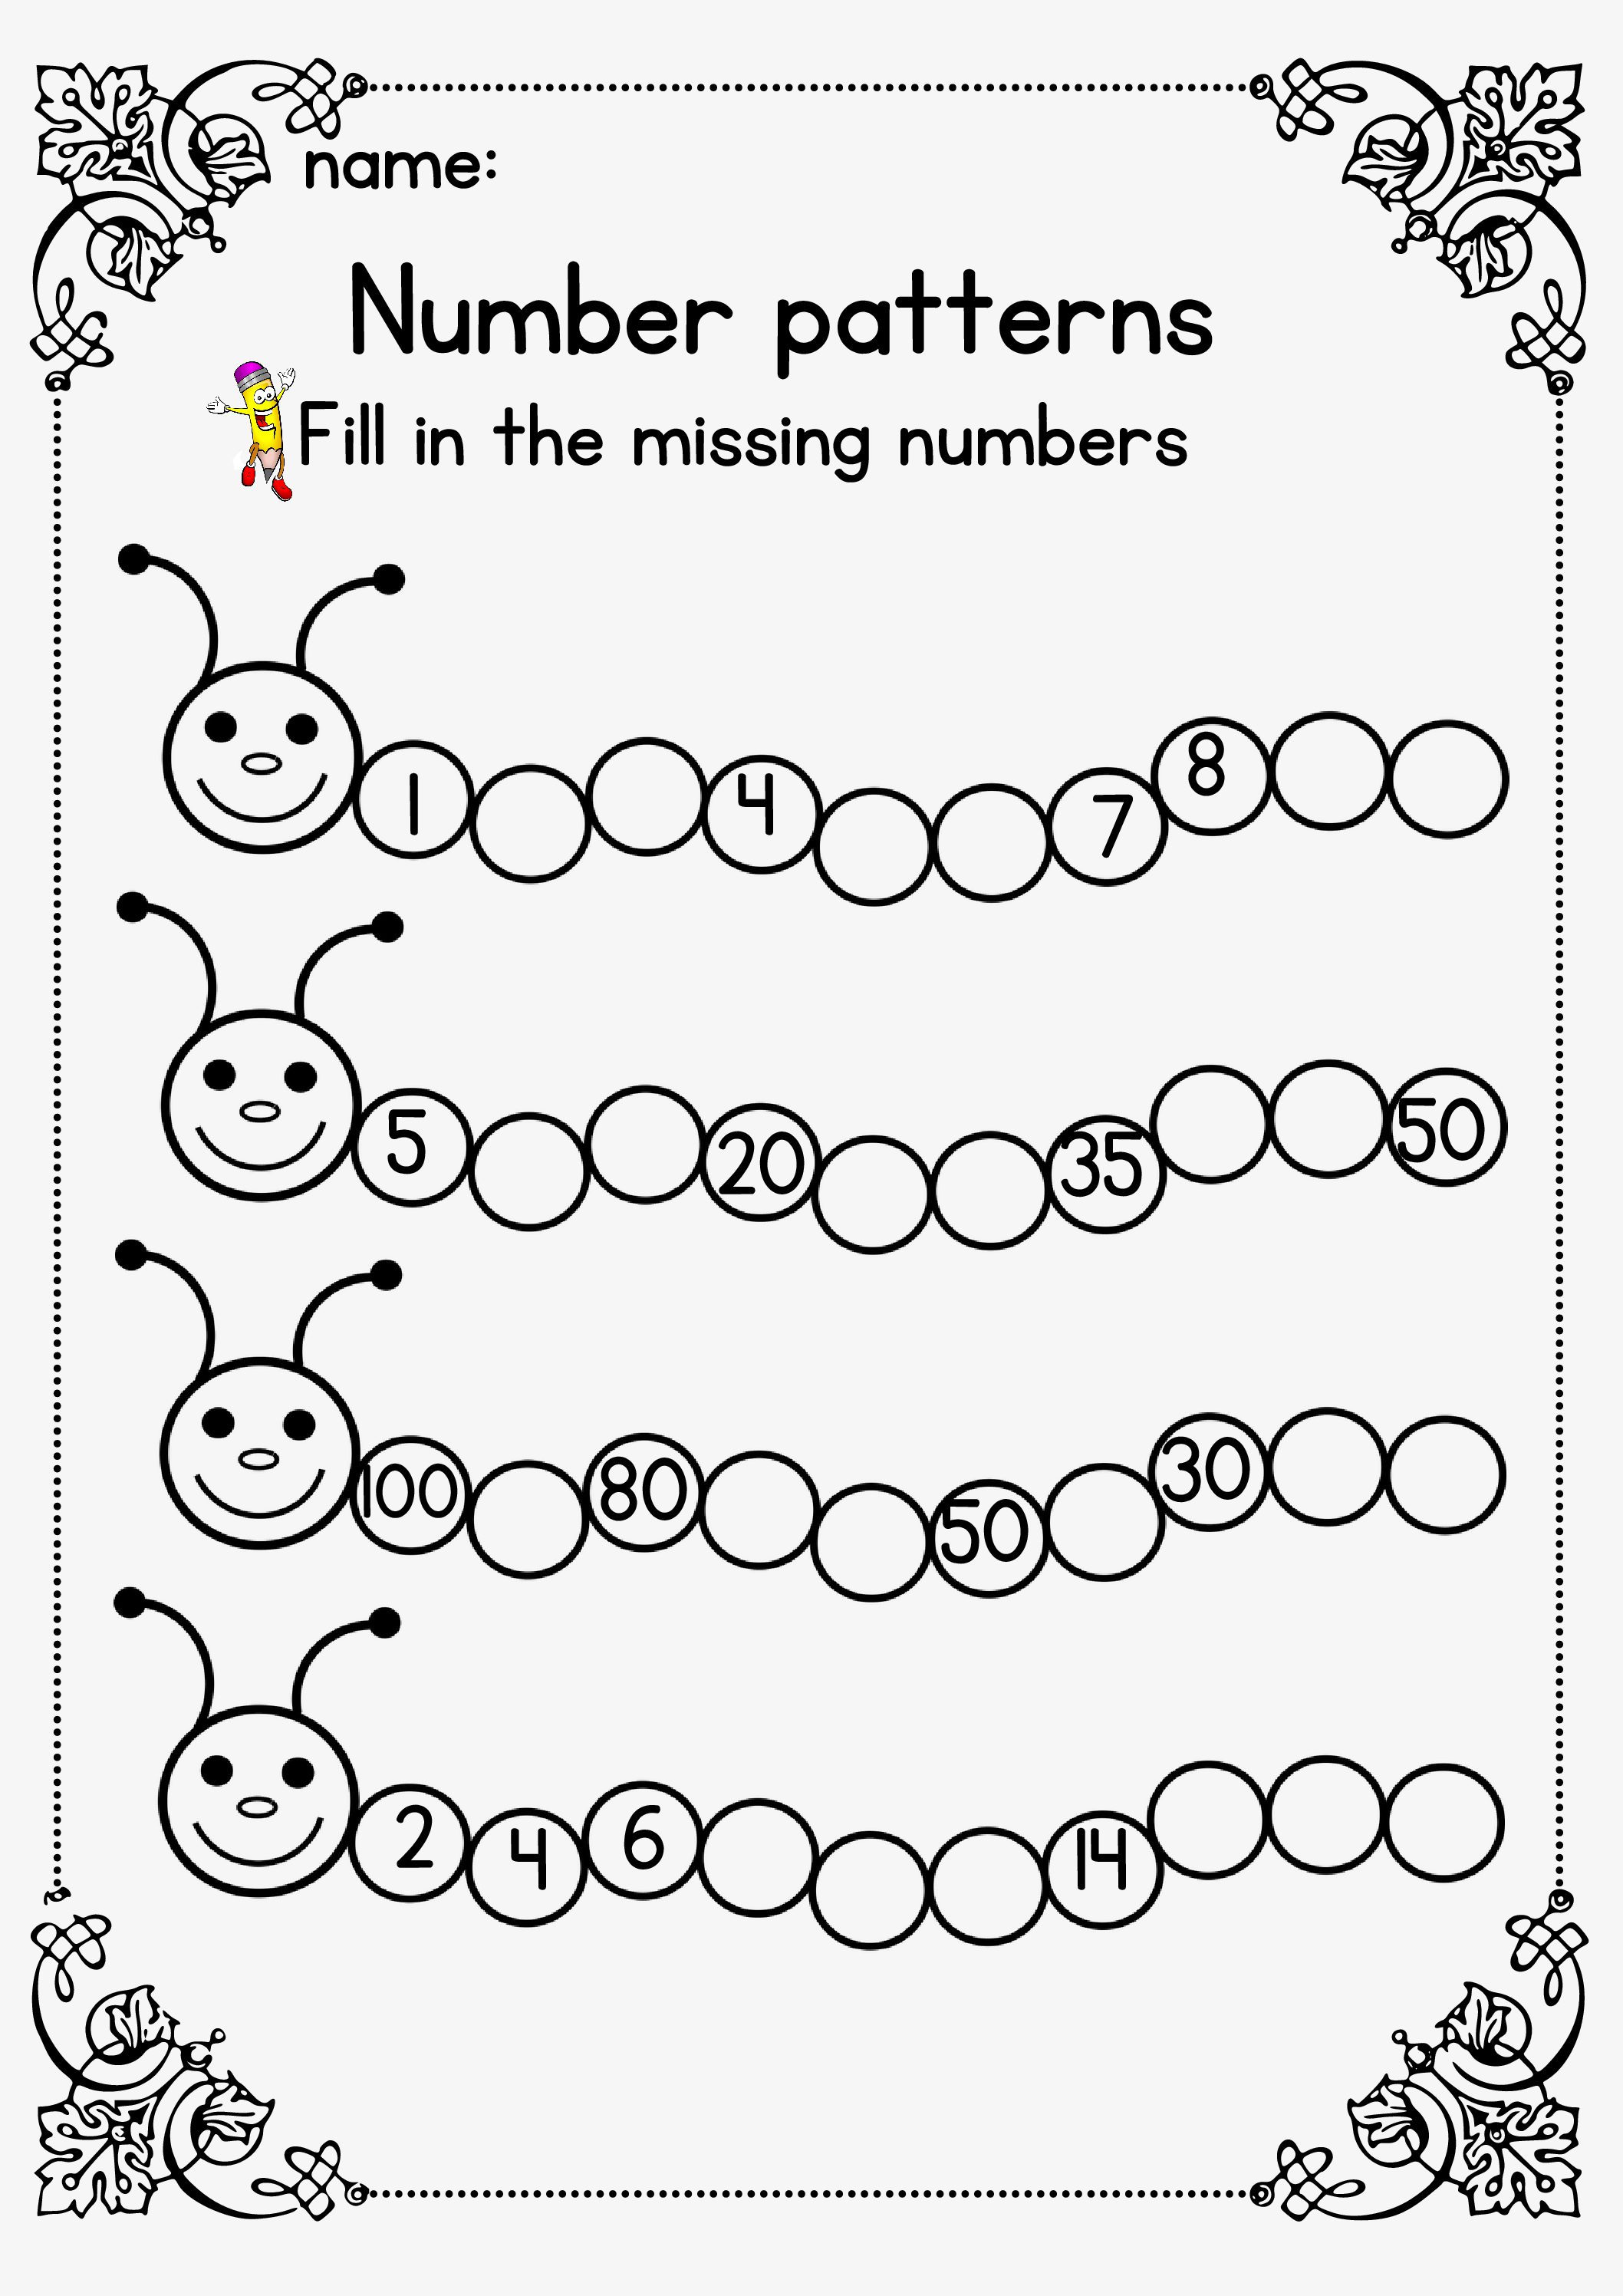 number-patterns-worksheet-number-patterns-worksheets-pattern-images